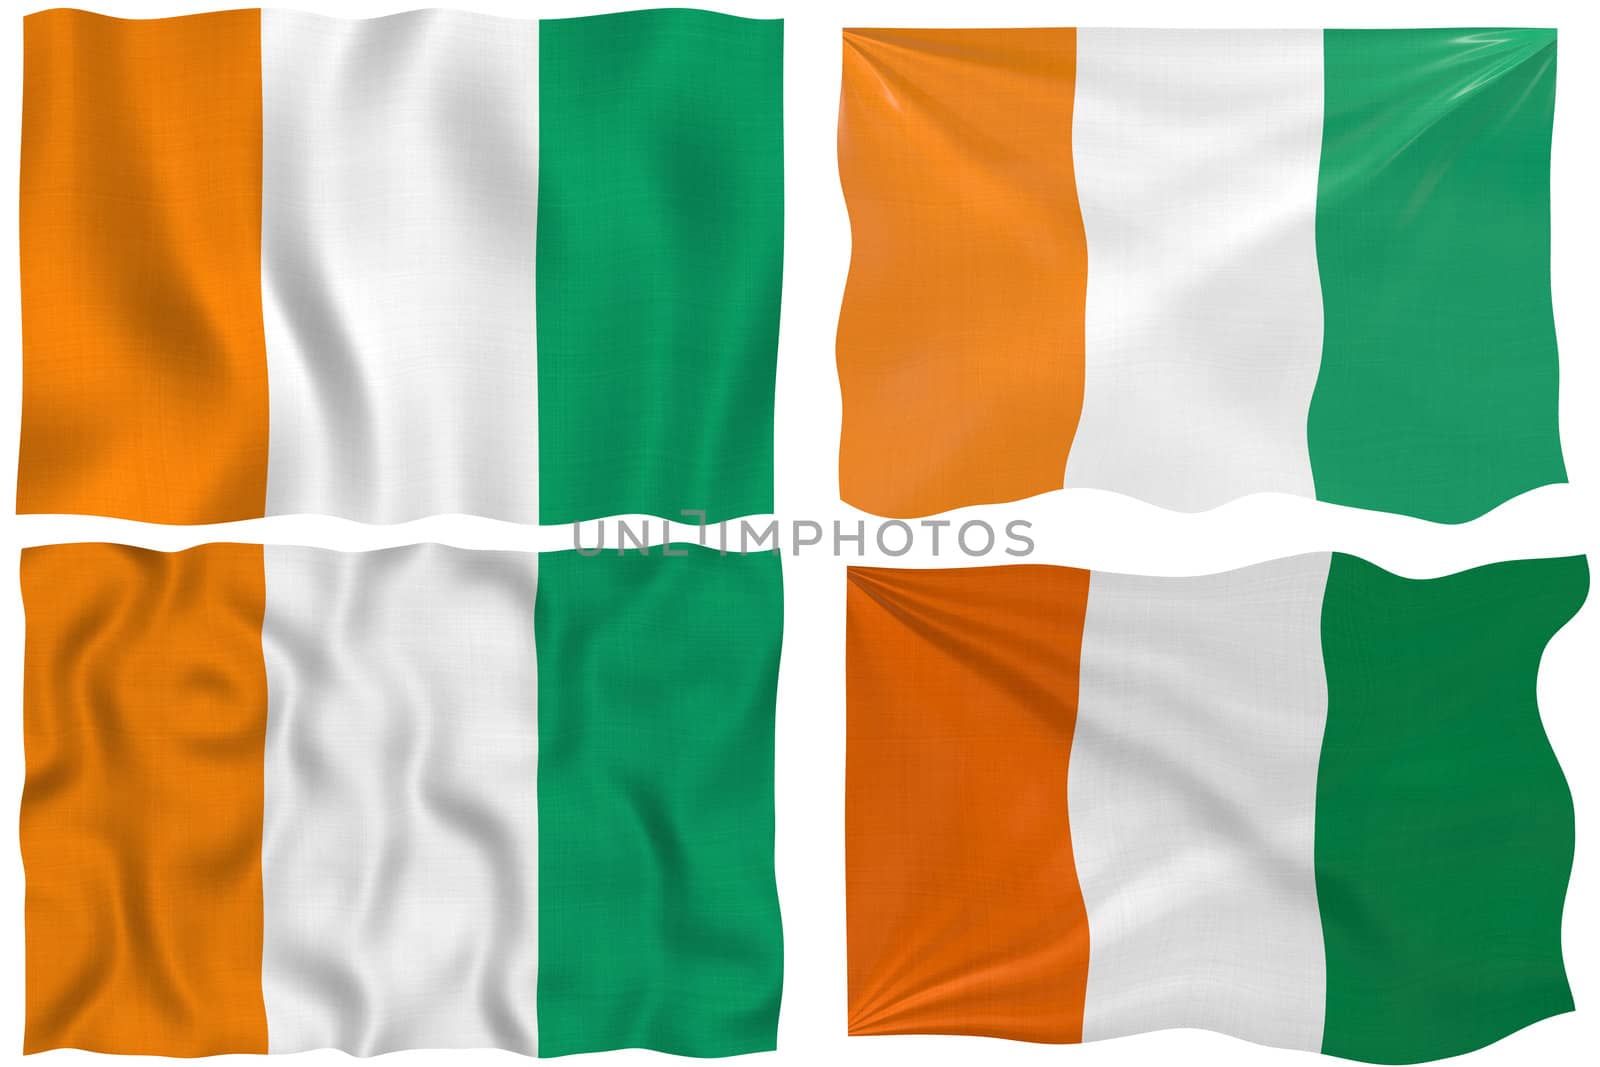 Great Image on white of four Flags of  Cote d'Ivoire Ivory Coast